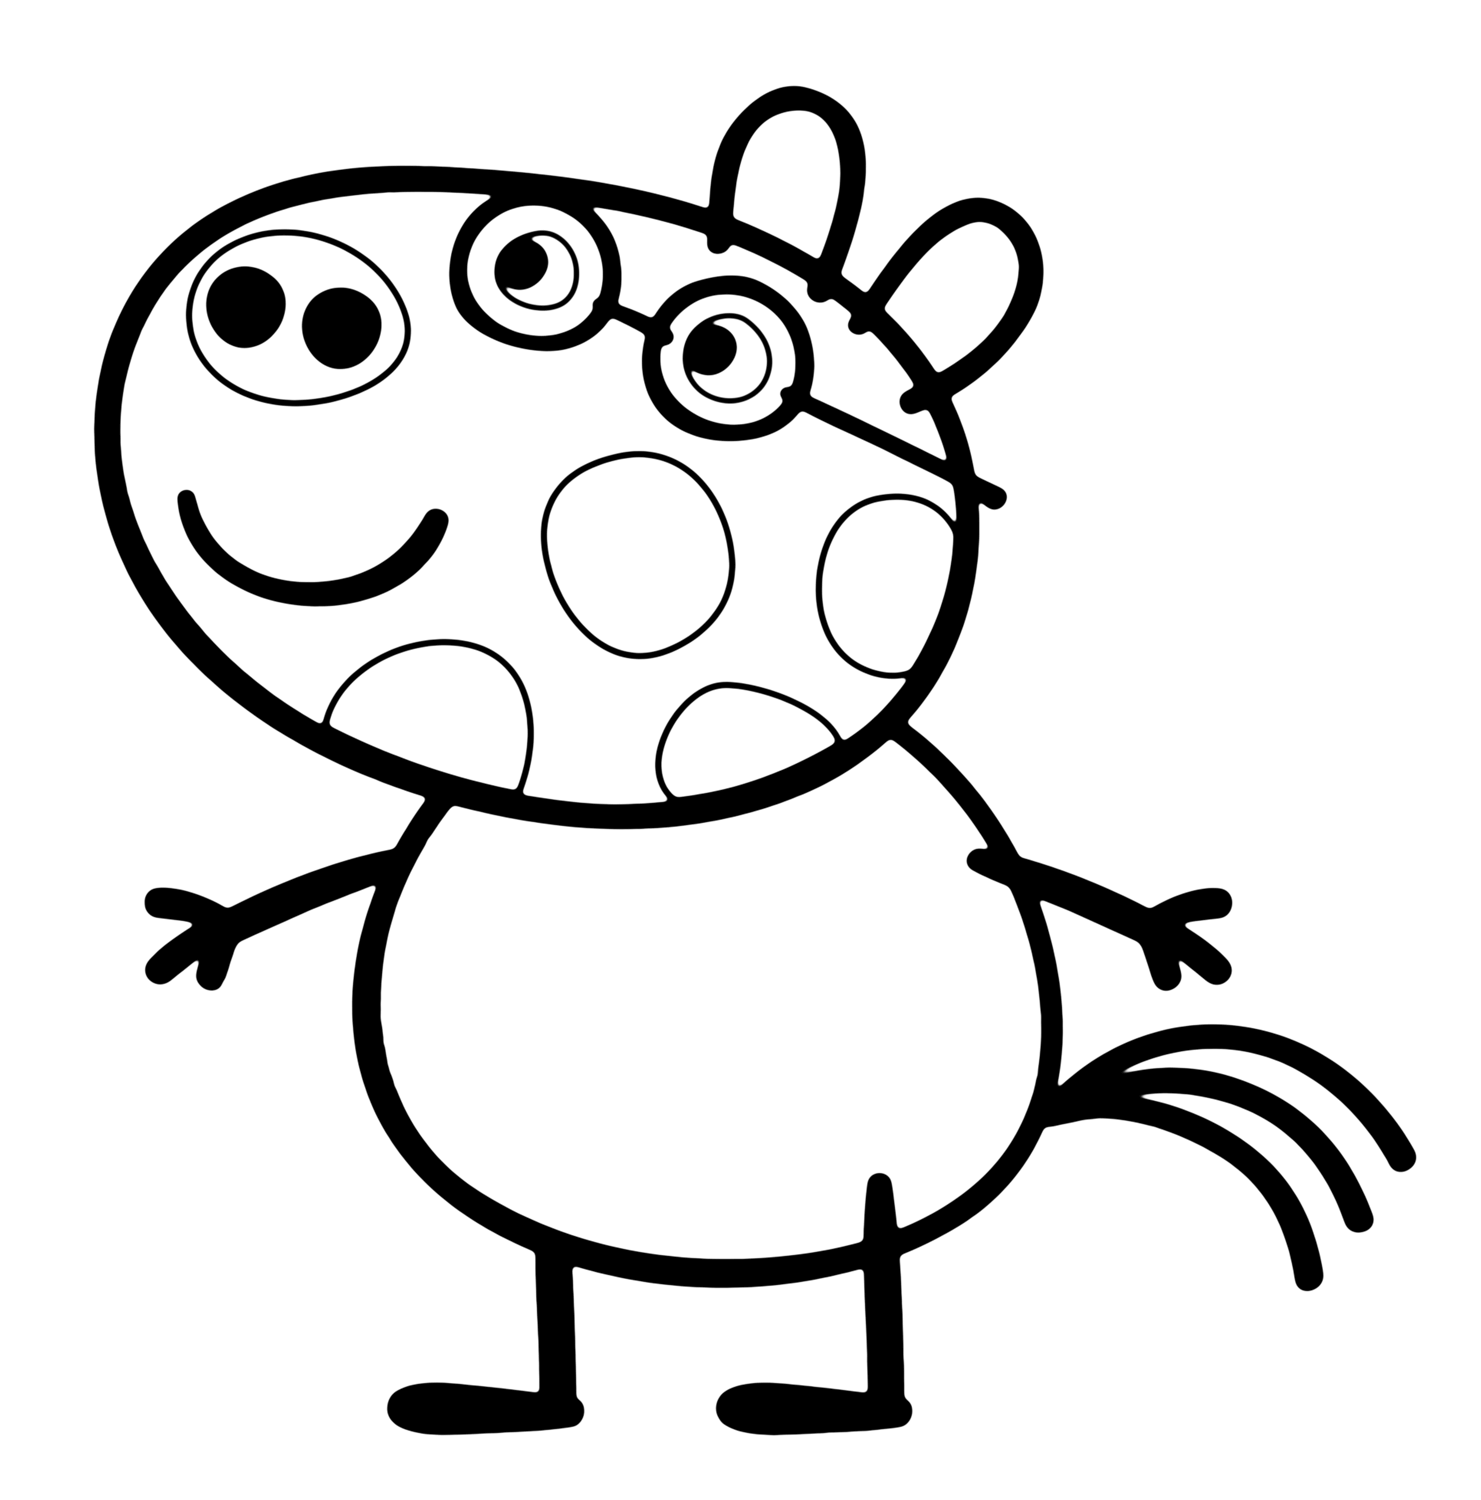 Pedro Pony In Peppa Pig Coloring Page